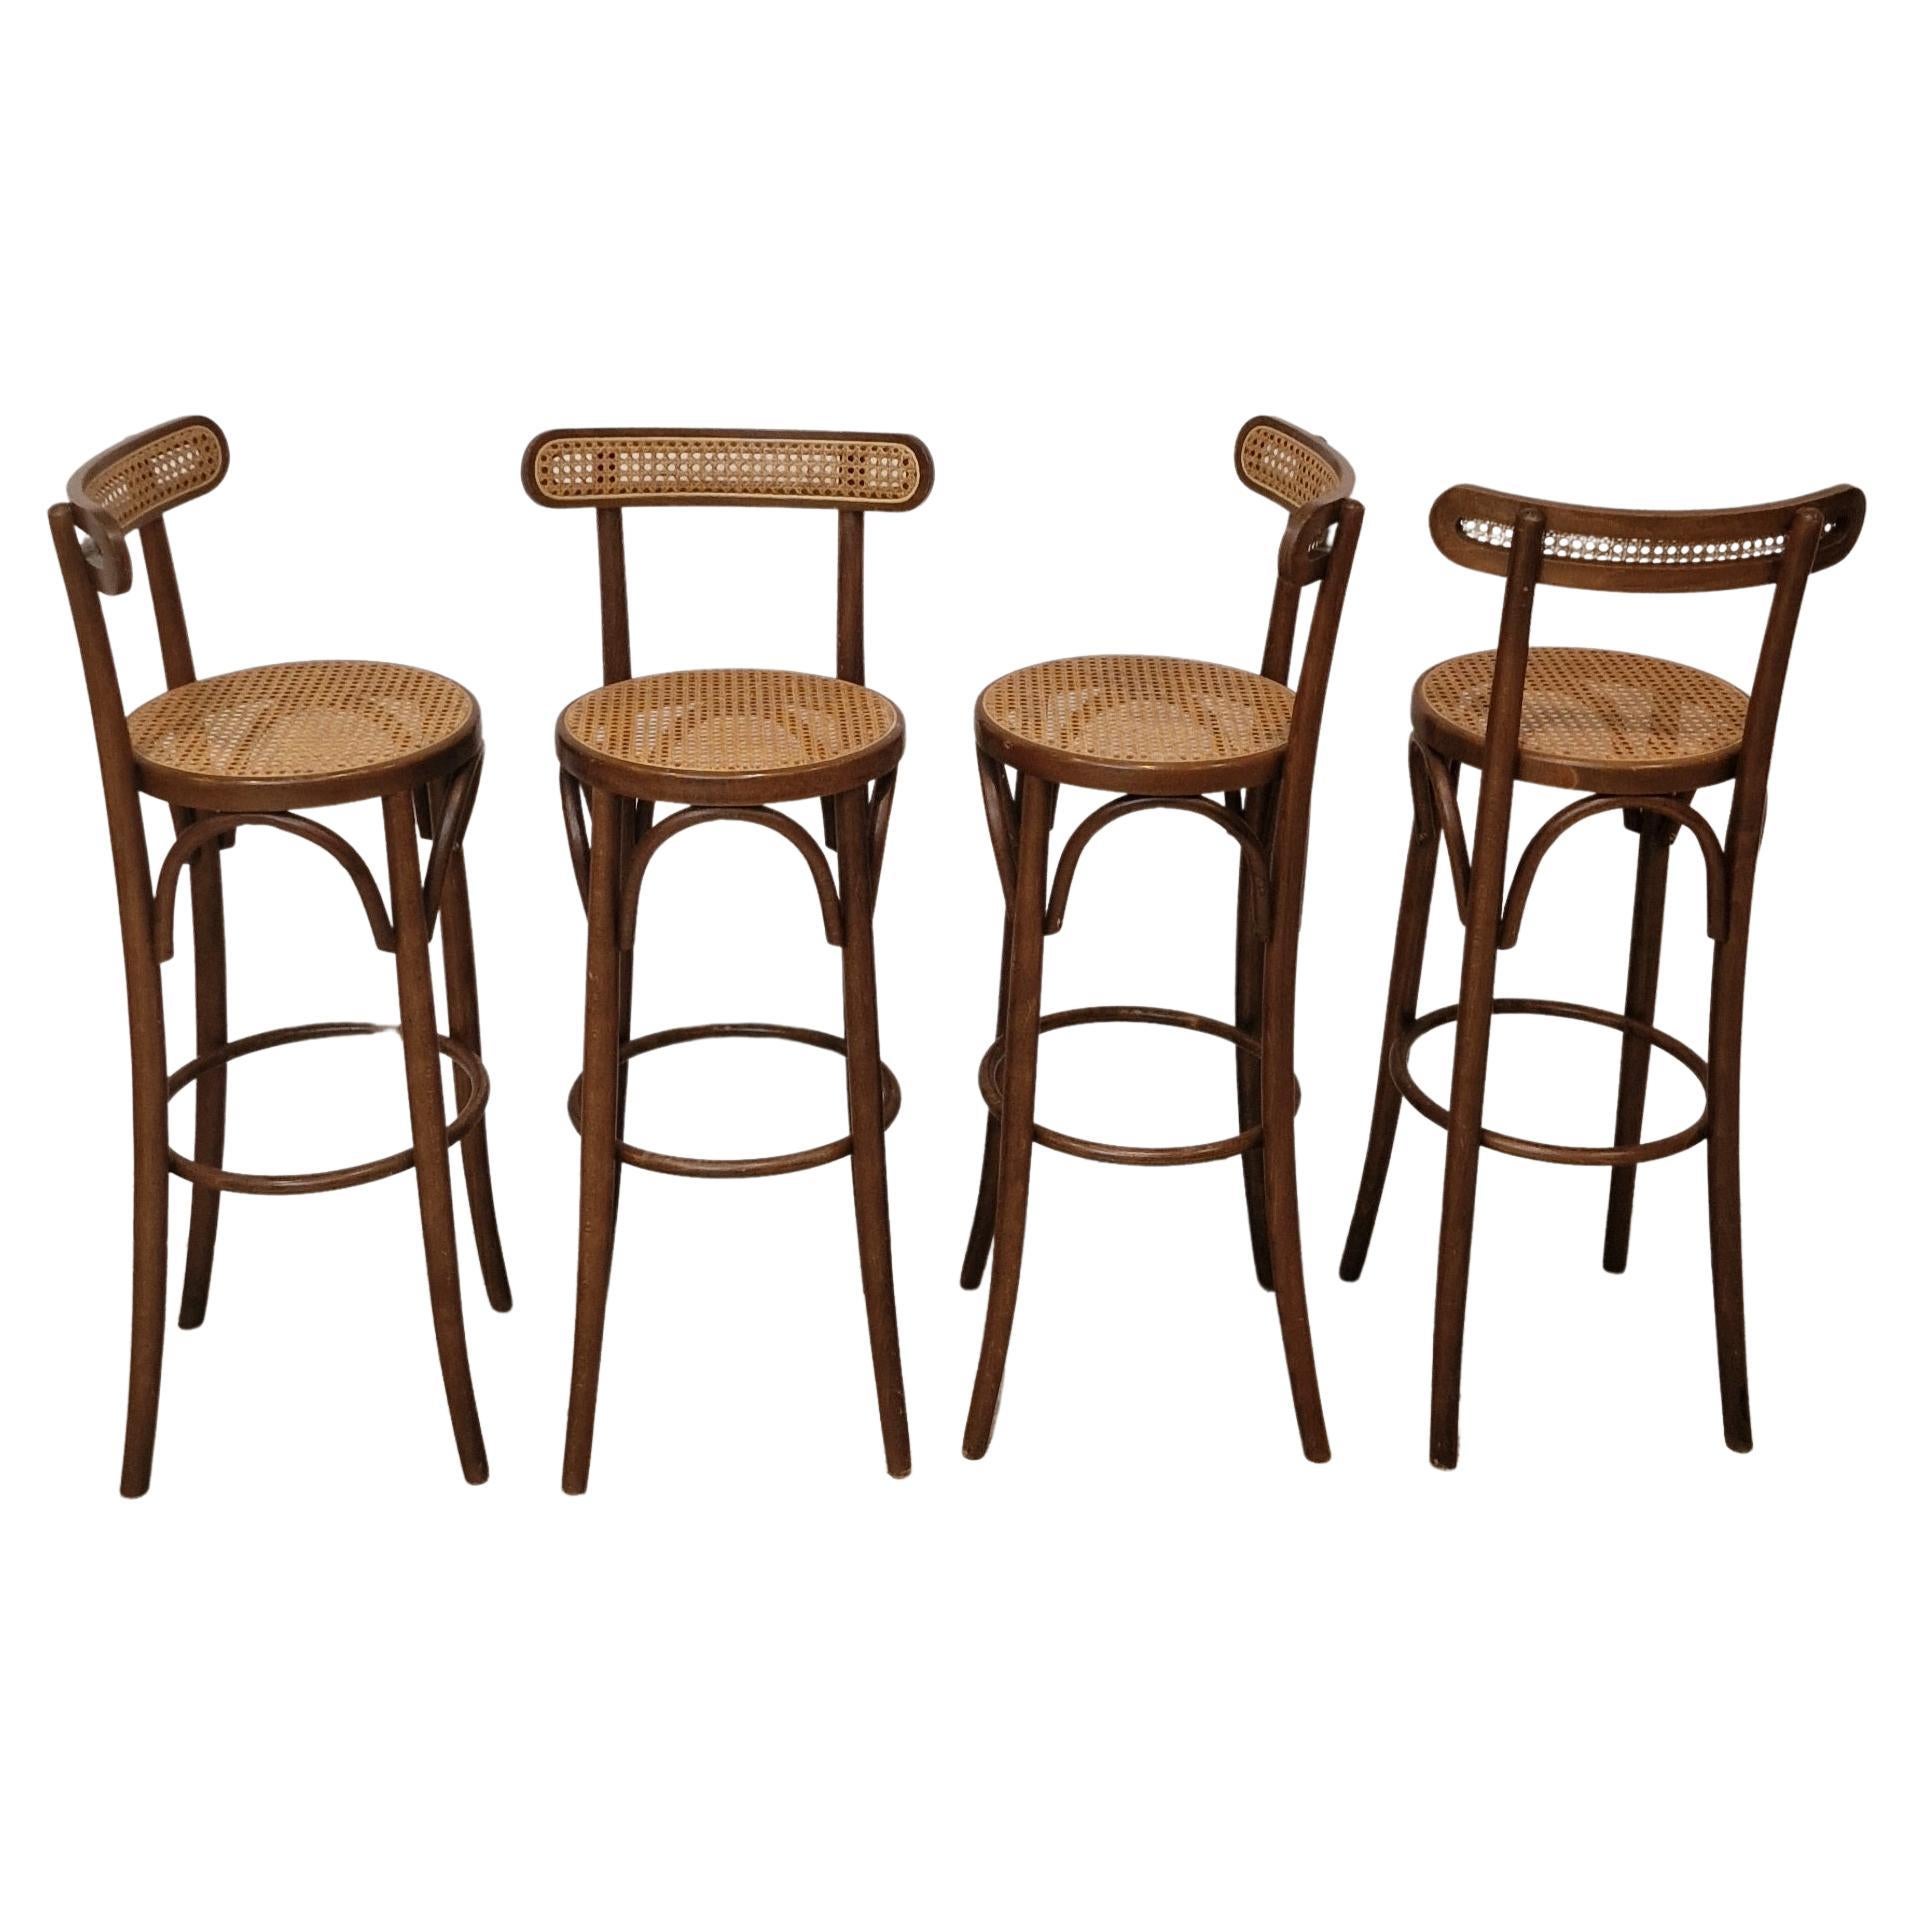 Set of 4 Canned, Wooden Barstools, French, 1980s